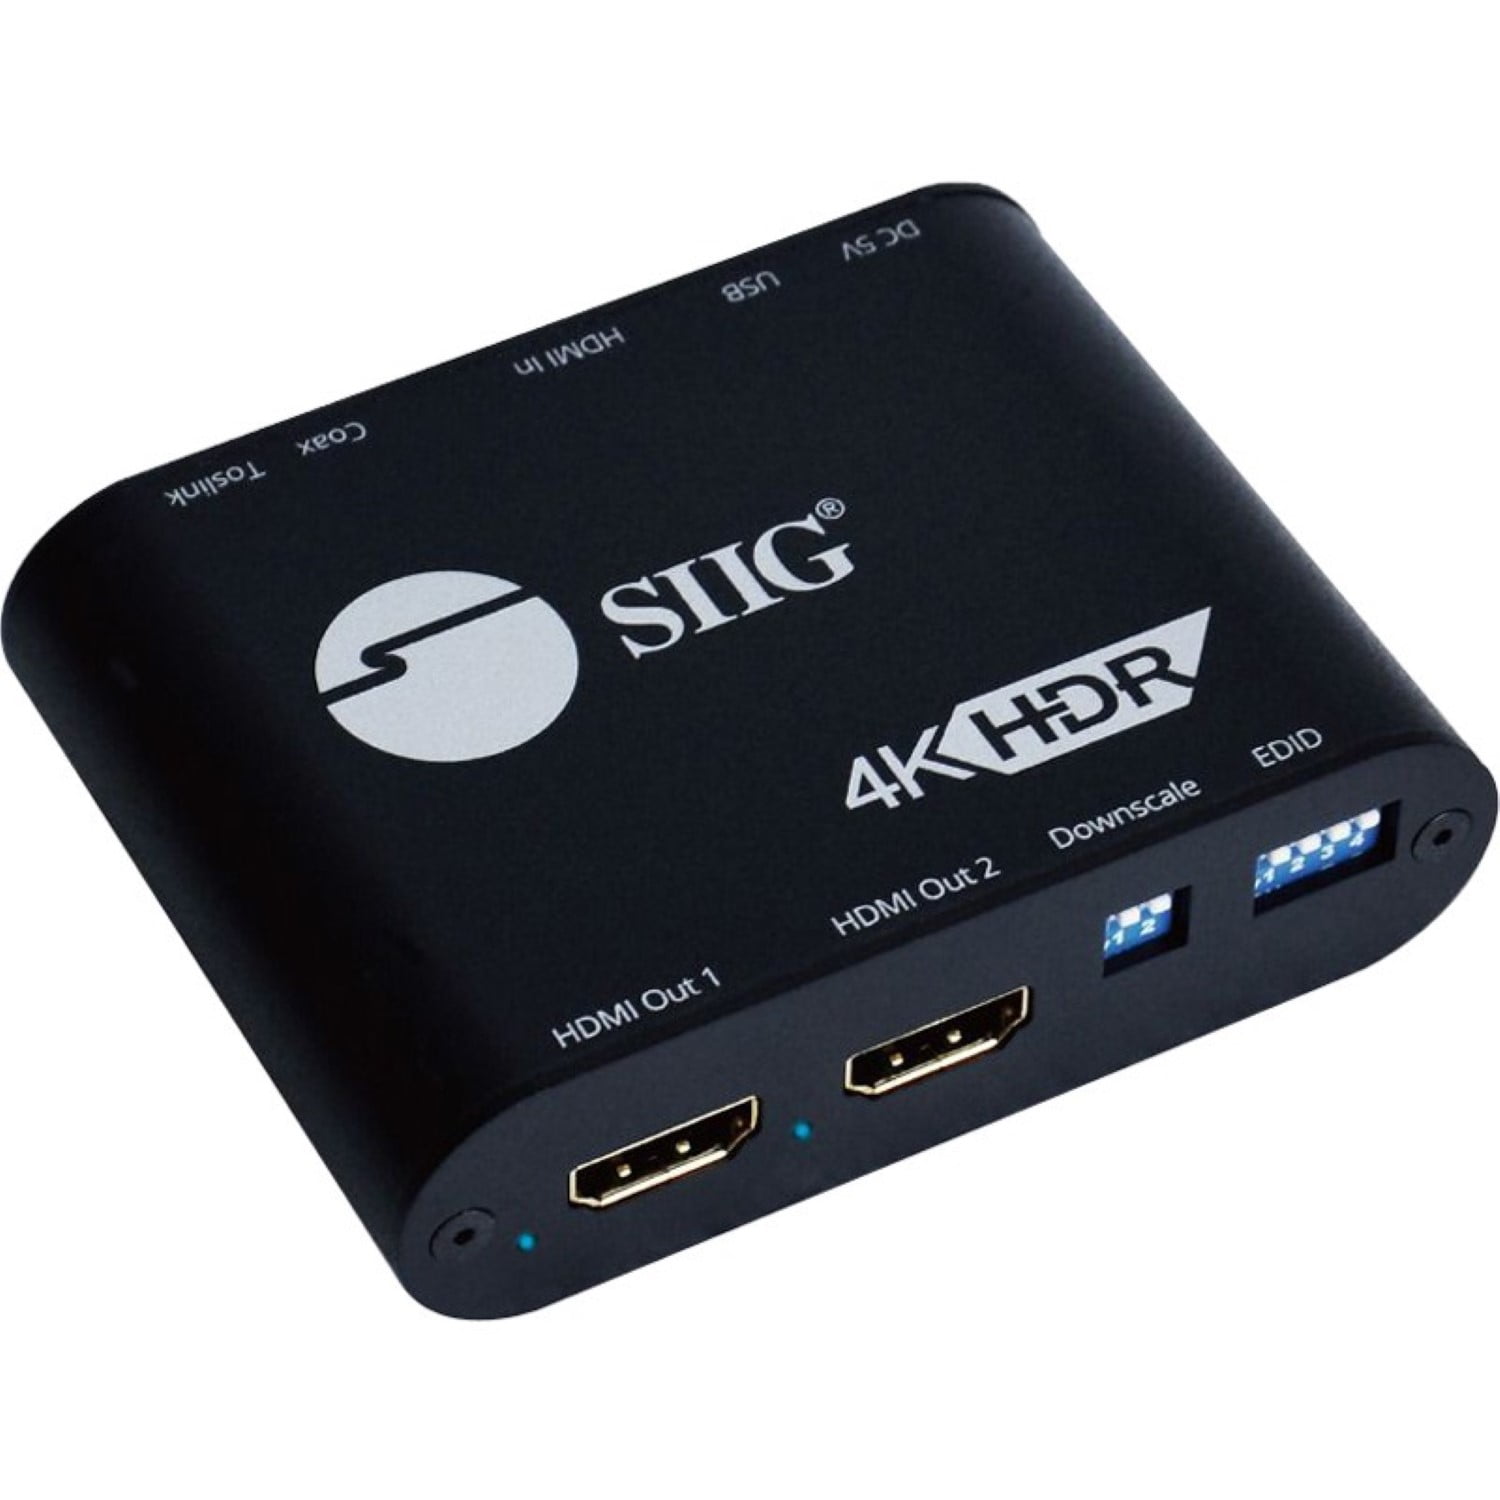 SIIG 4-Port 1x4 HDMI 2.0 Mini Splitter 4K HDR with Auto Video Scaling and EDID